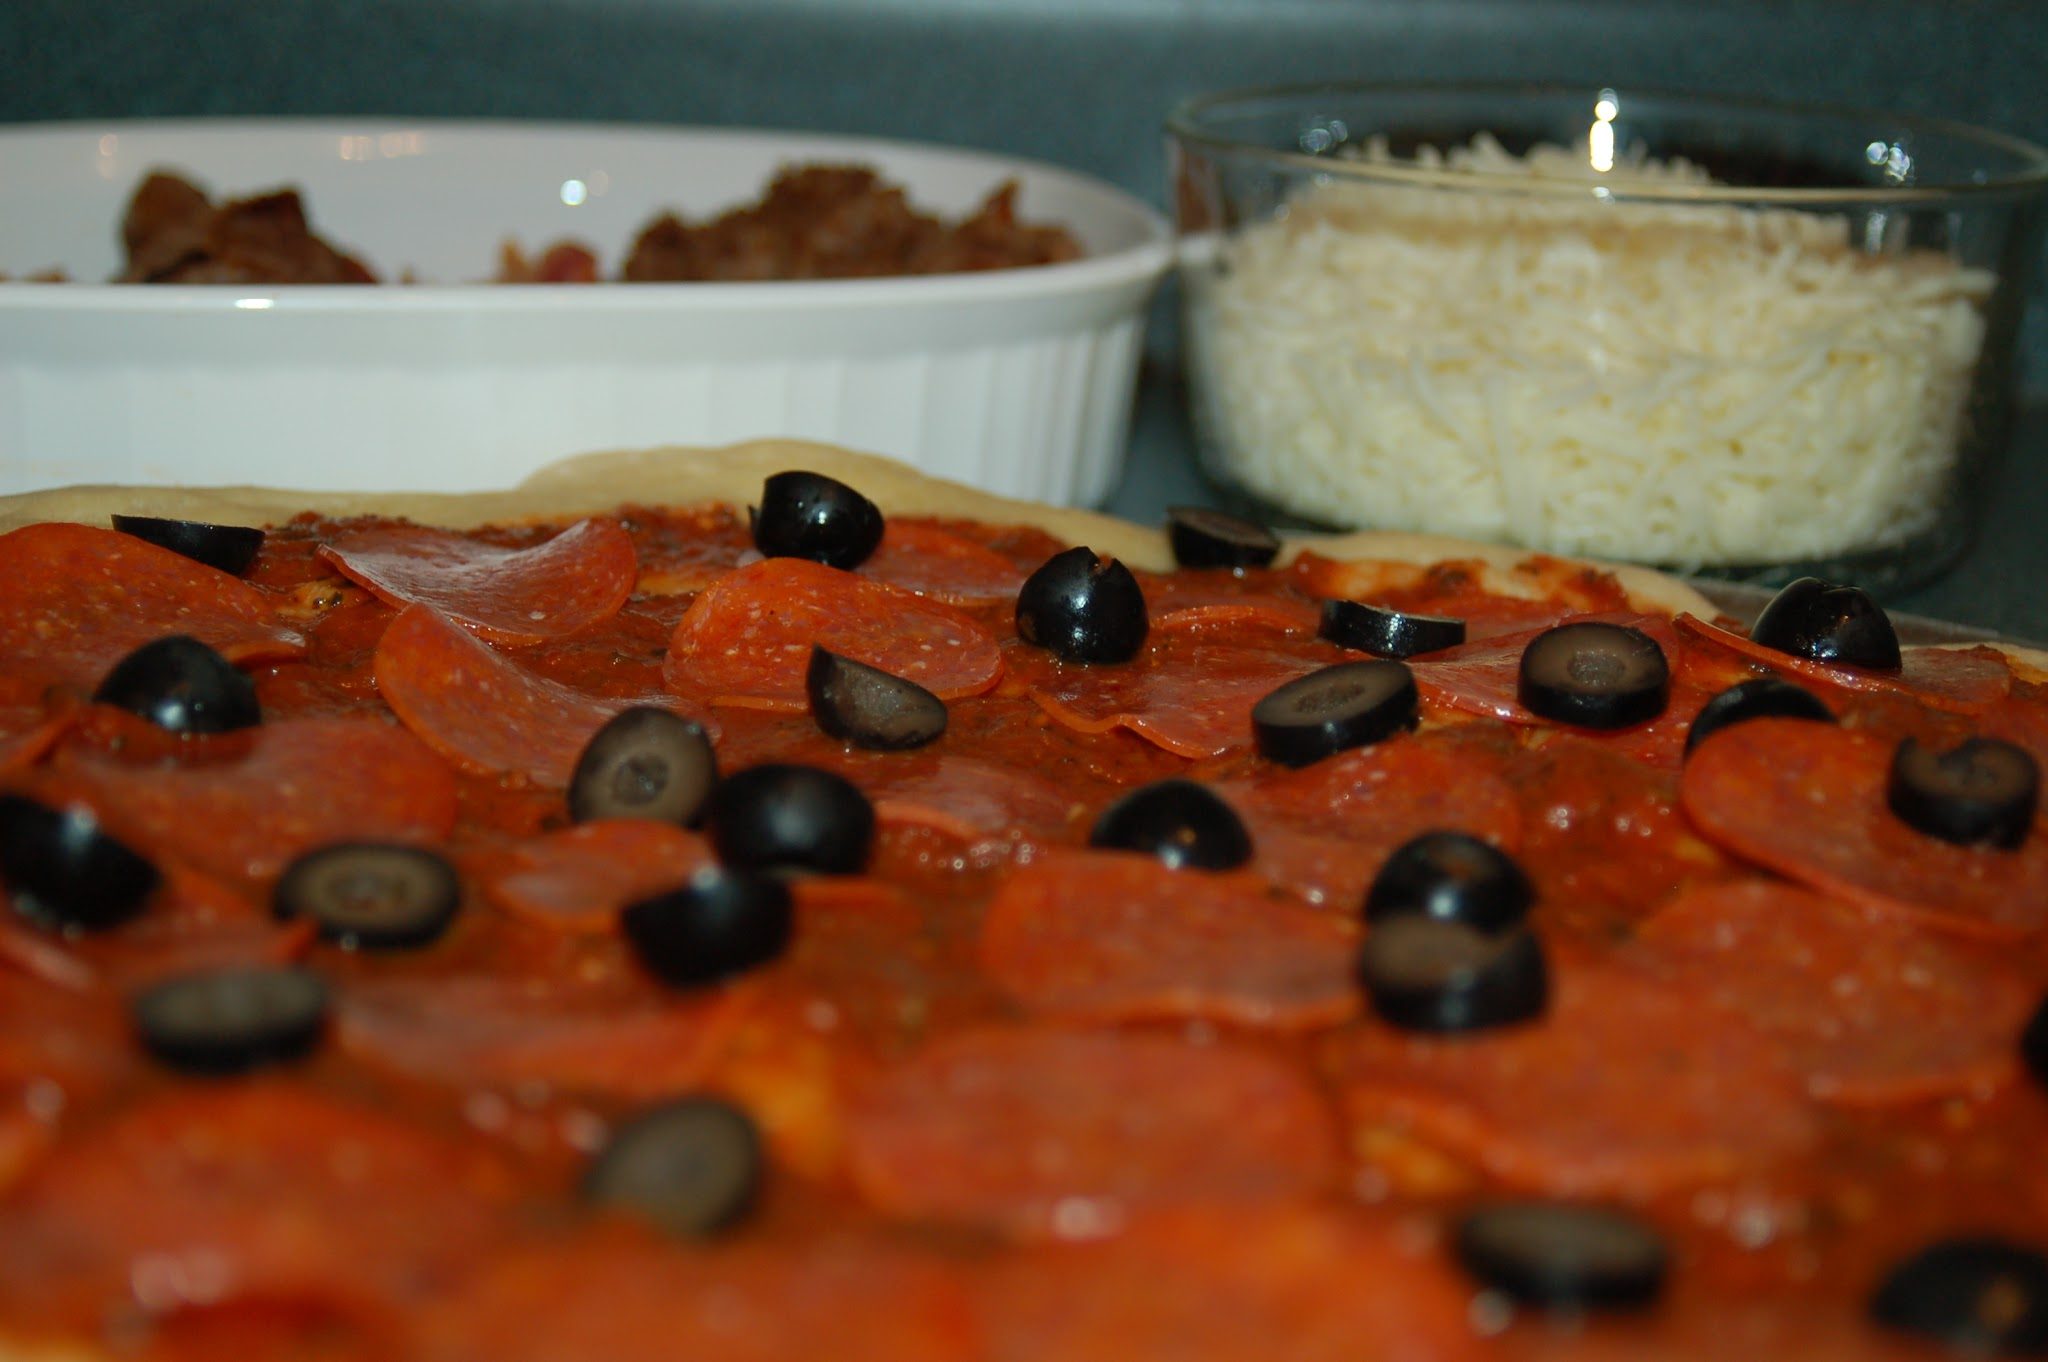 pepperoni pizza with black olives, close up